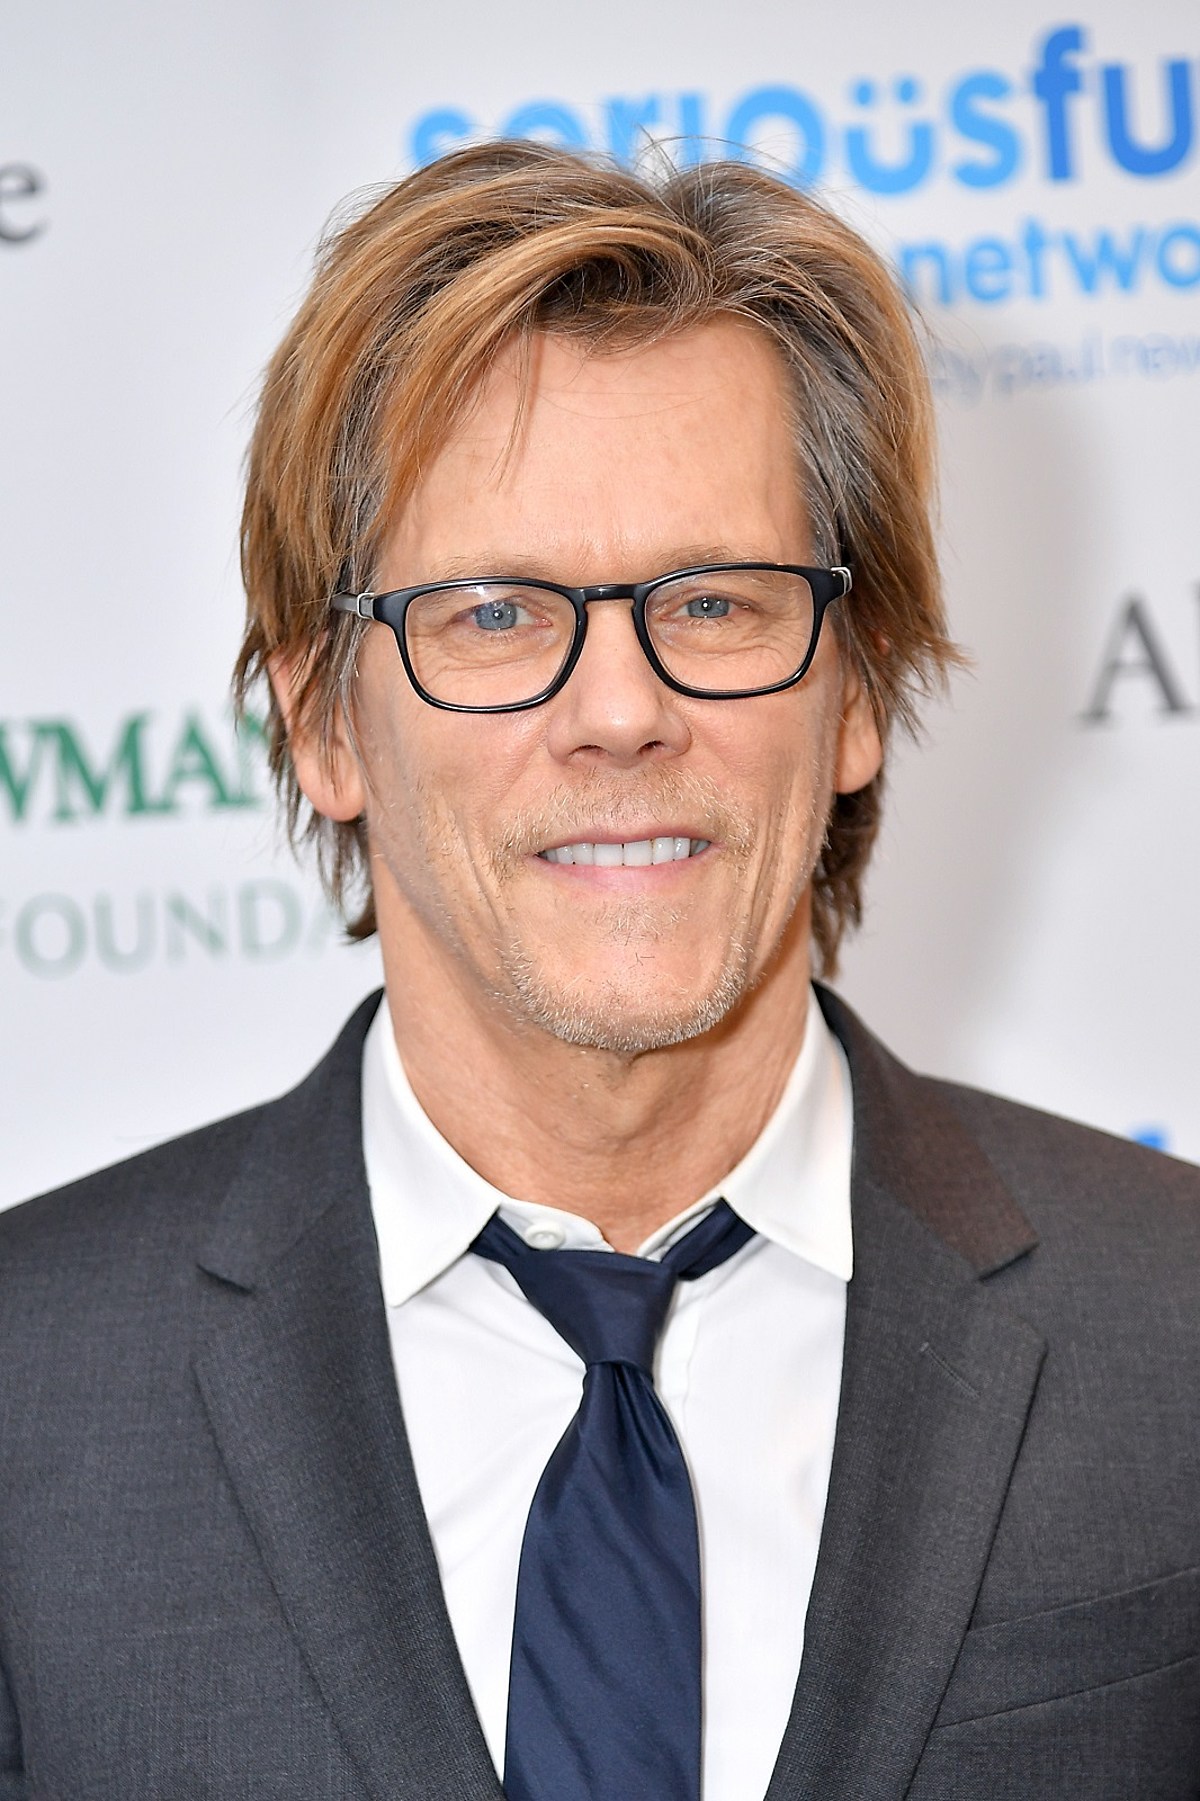 Kevin-Bacon-Getty-Images